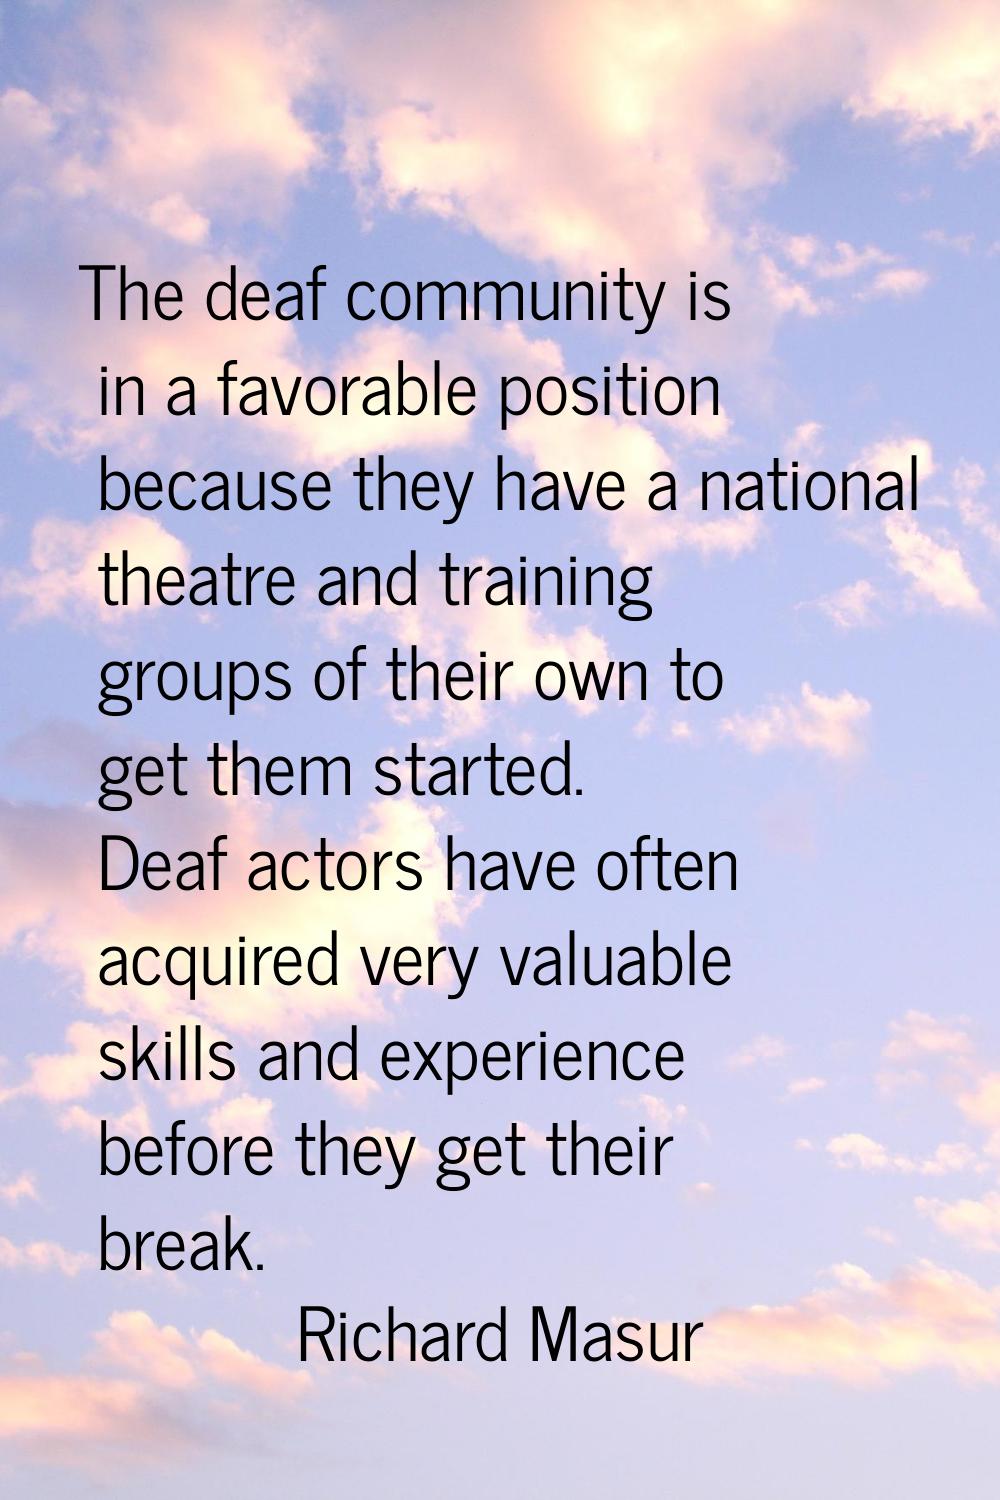 The deaf community is in a favorable position because they have a national theatre and training gro